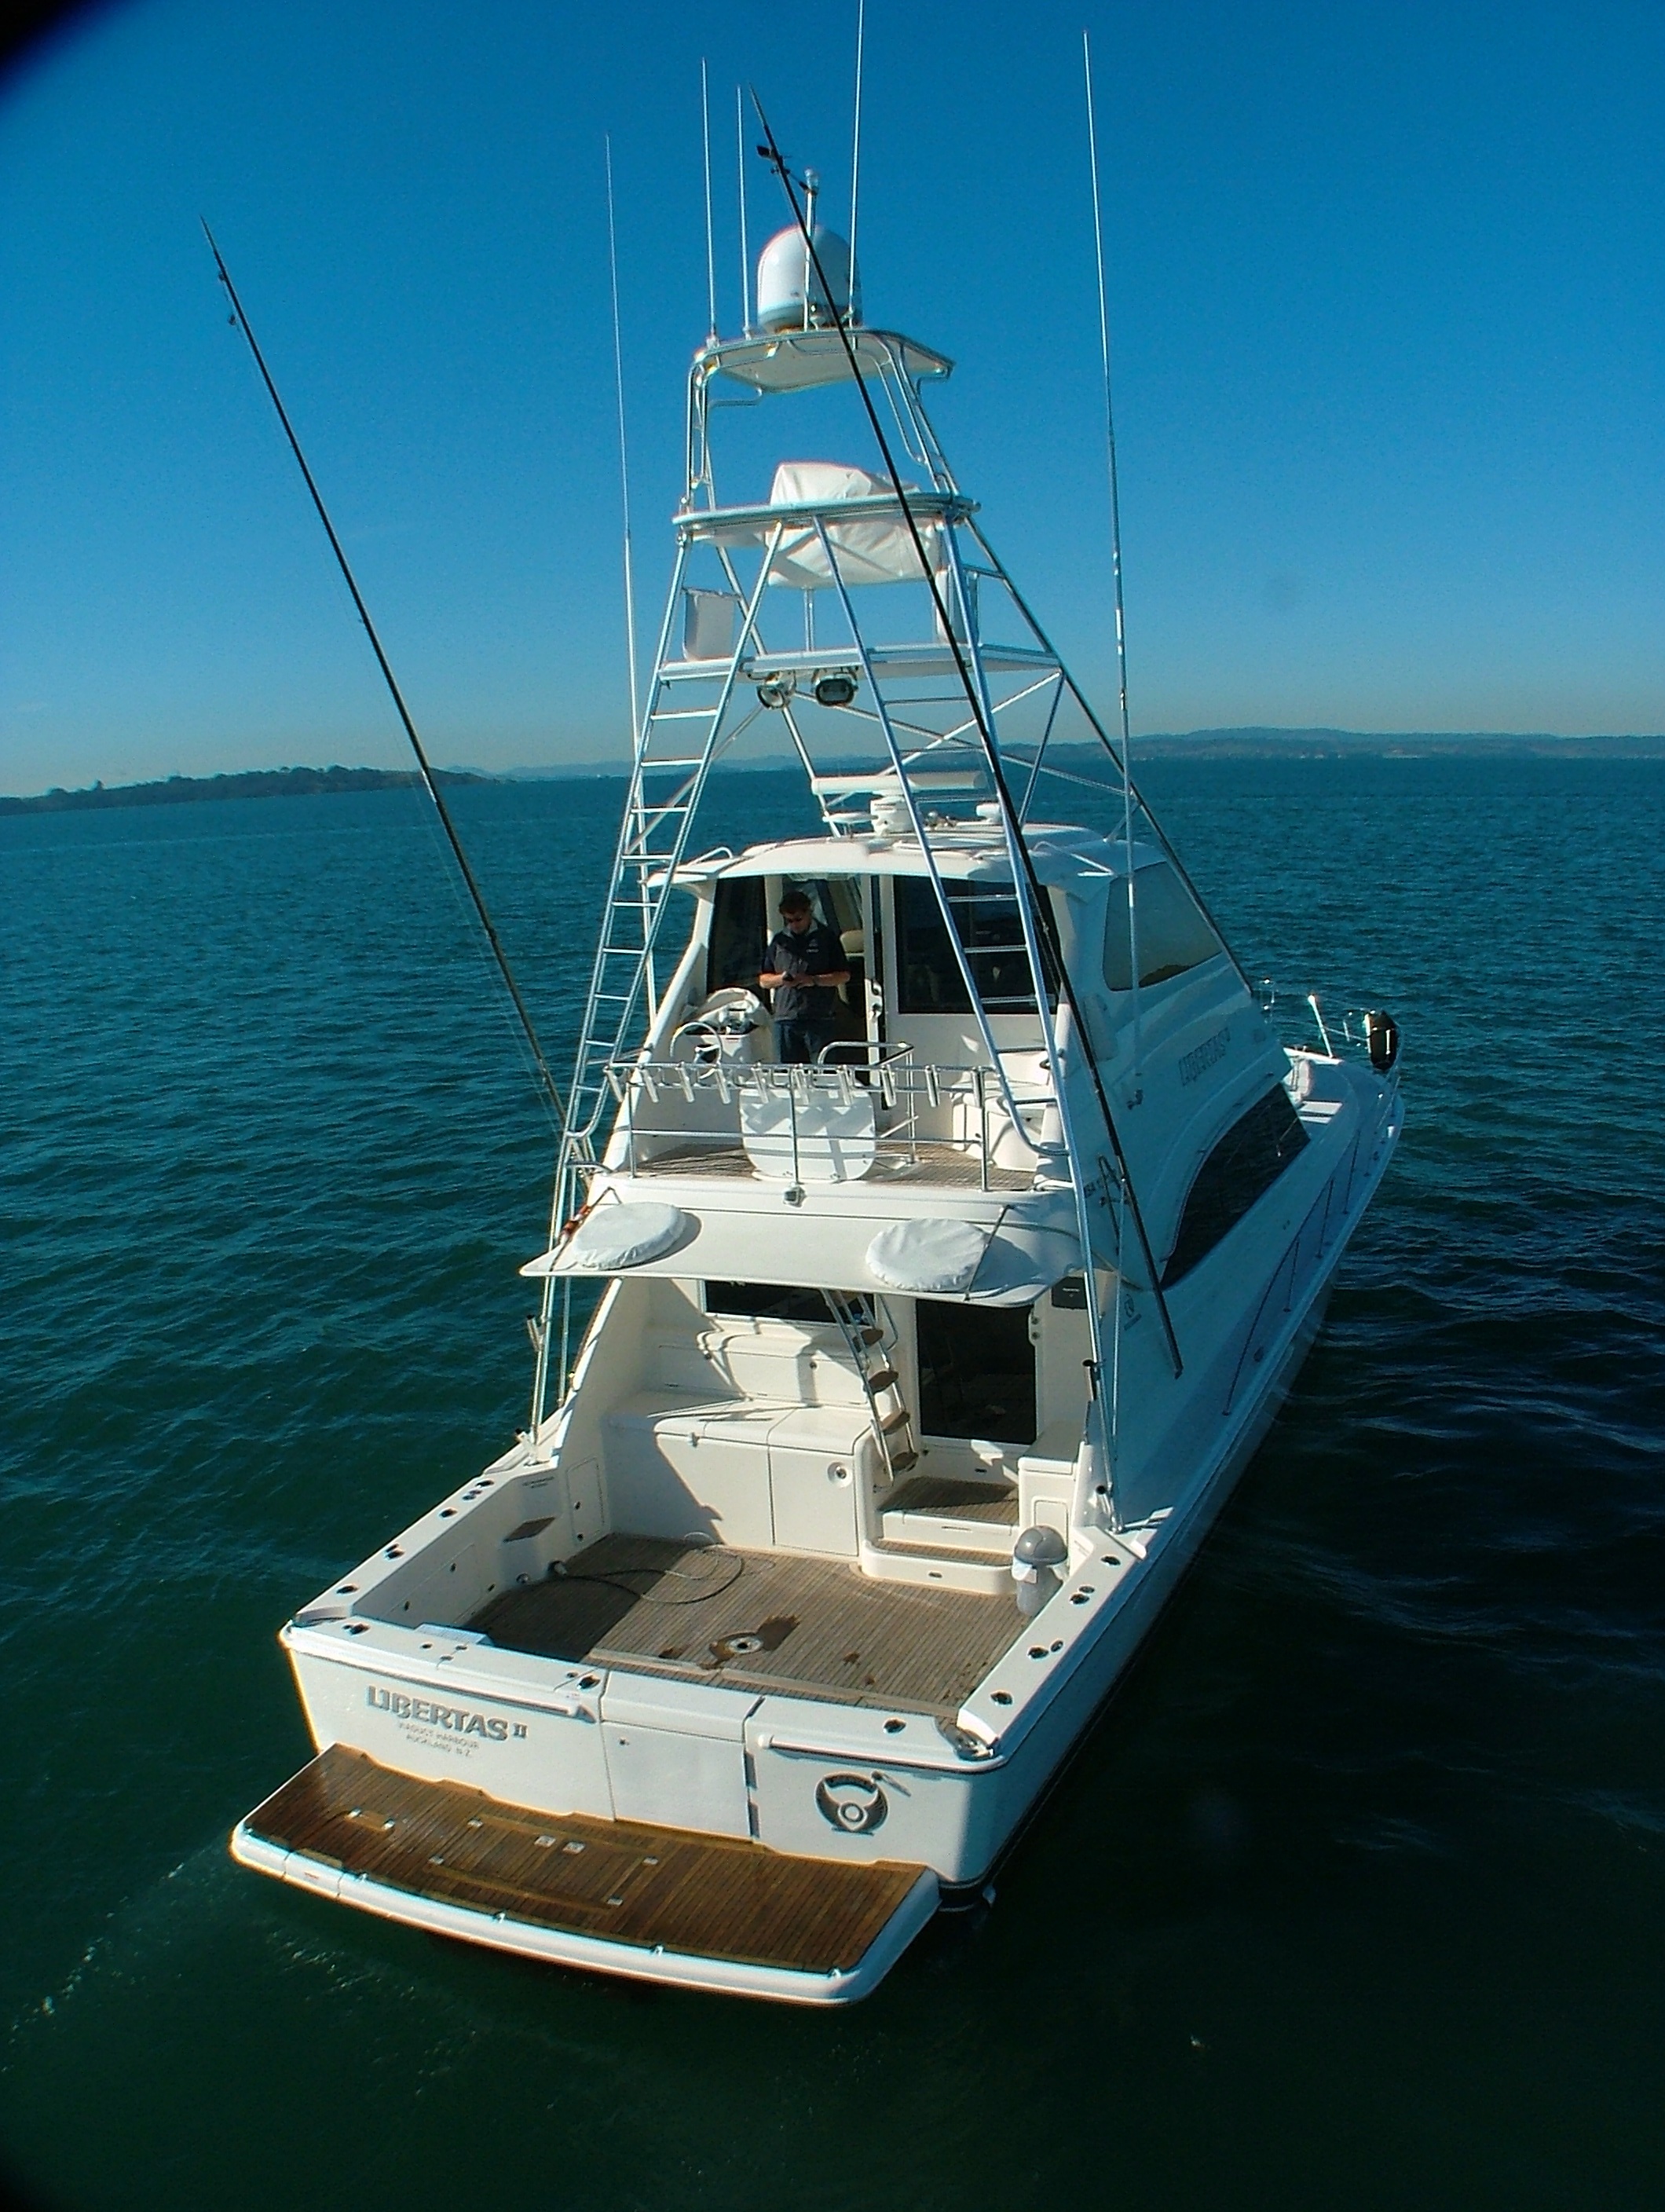 Champion New Zealand big game fishing boat goes on the market for